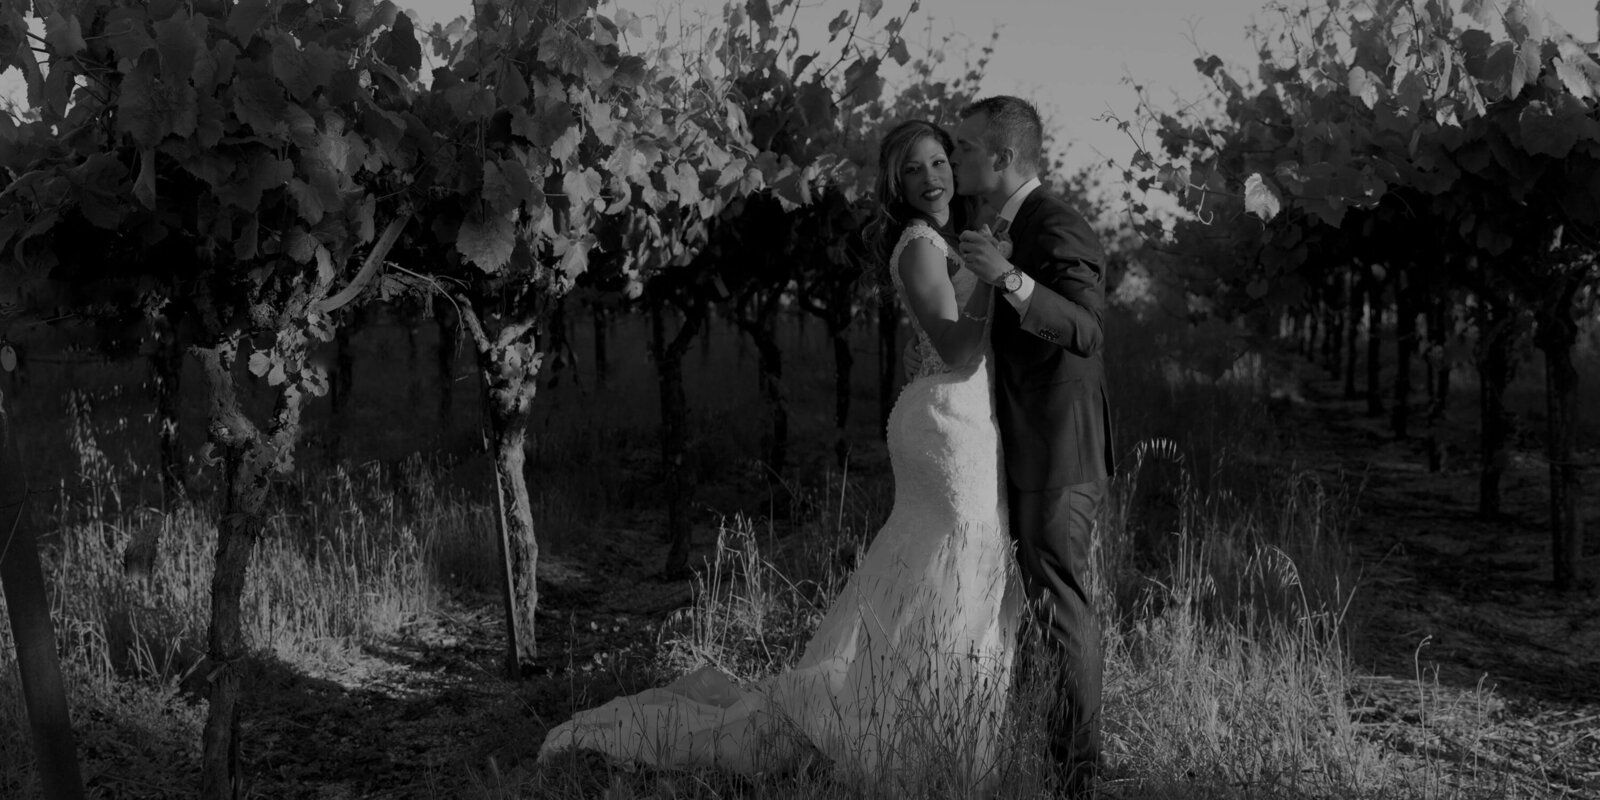 Newly married couple embrace for a dance at a vineyard wedding.